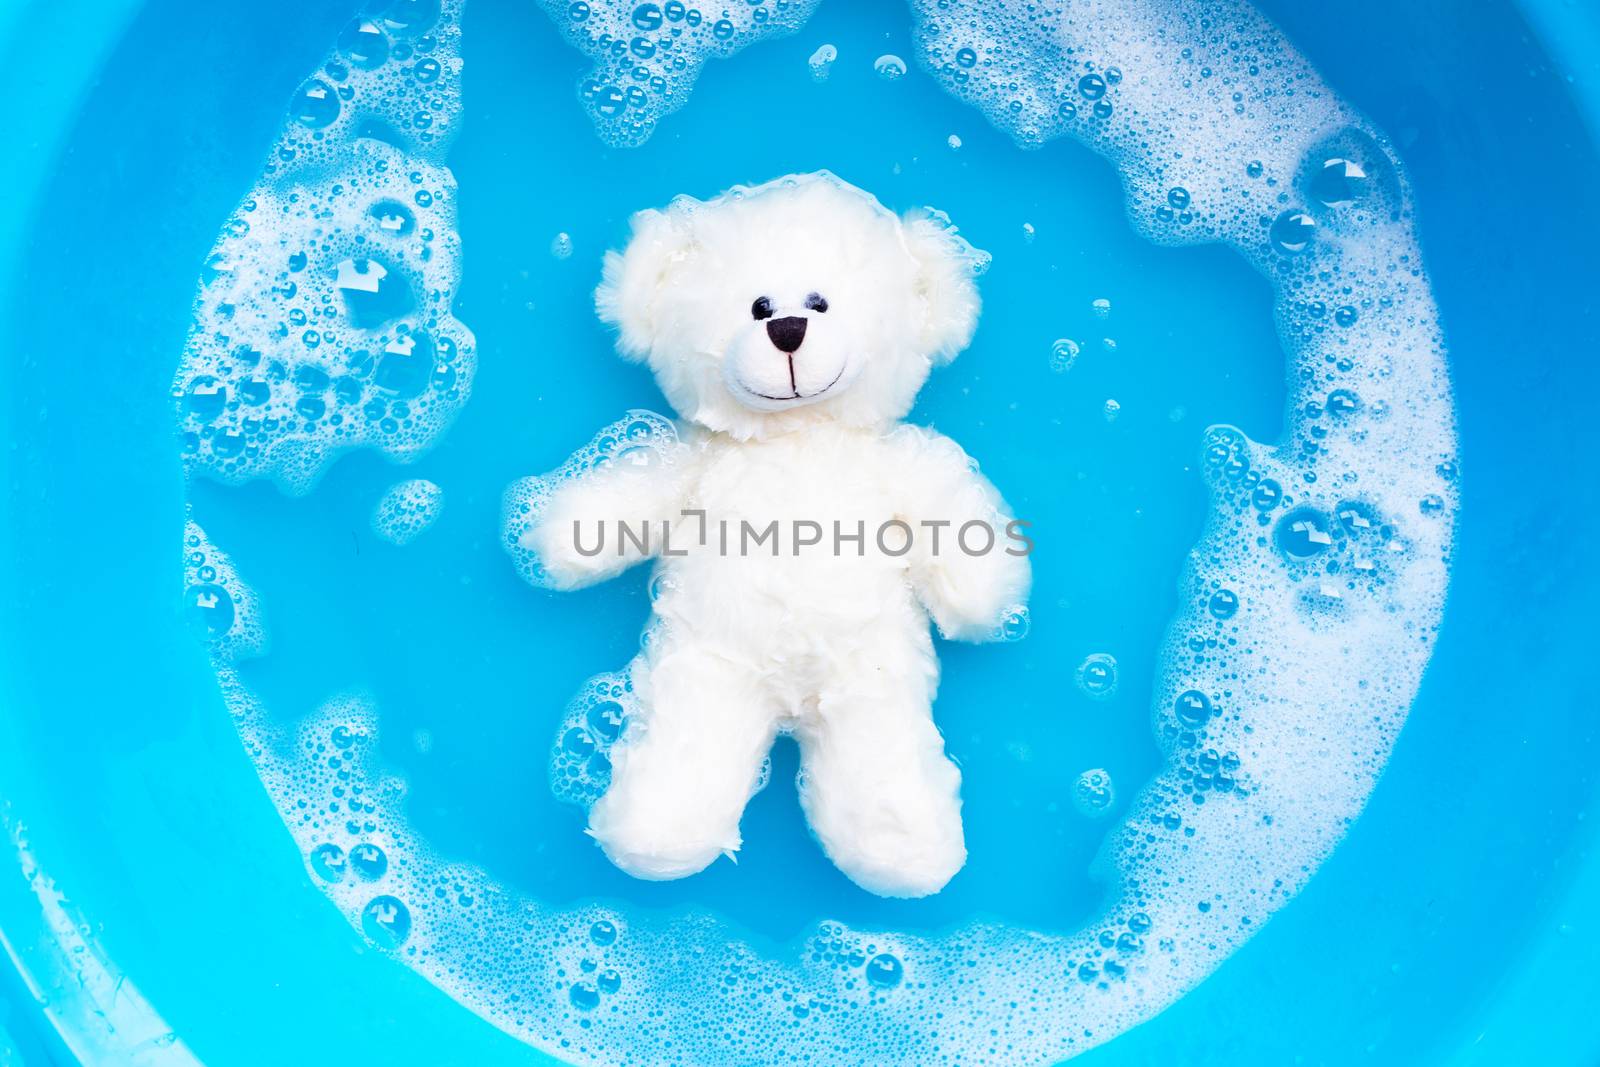 Soak toy bear in laundry detergent water dissolution before wash by Bowonpat